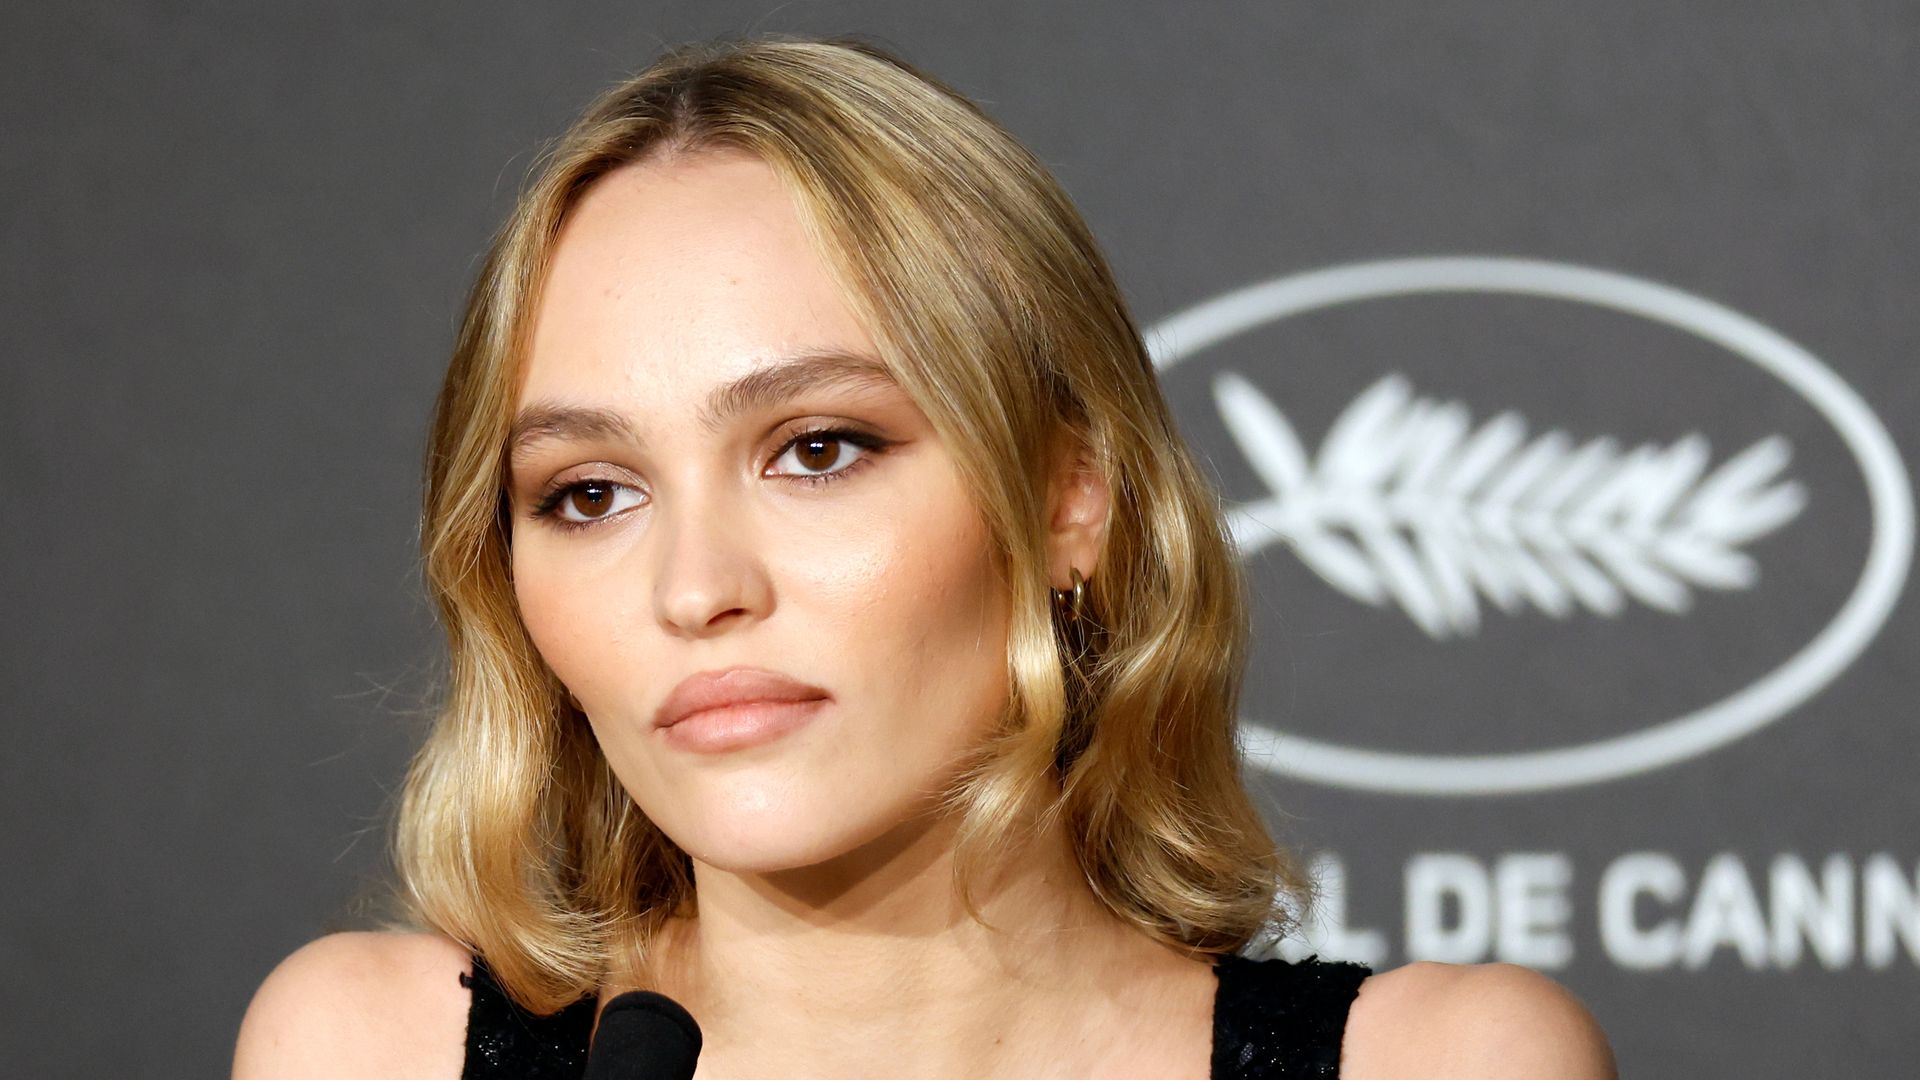 Lily-Rose Depp speaks into mic at Cannes Festival for The Idol premiere